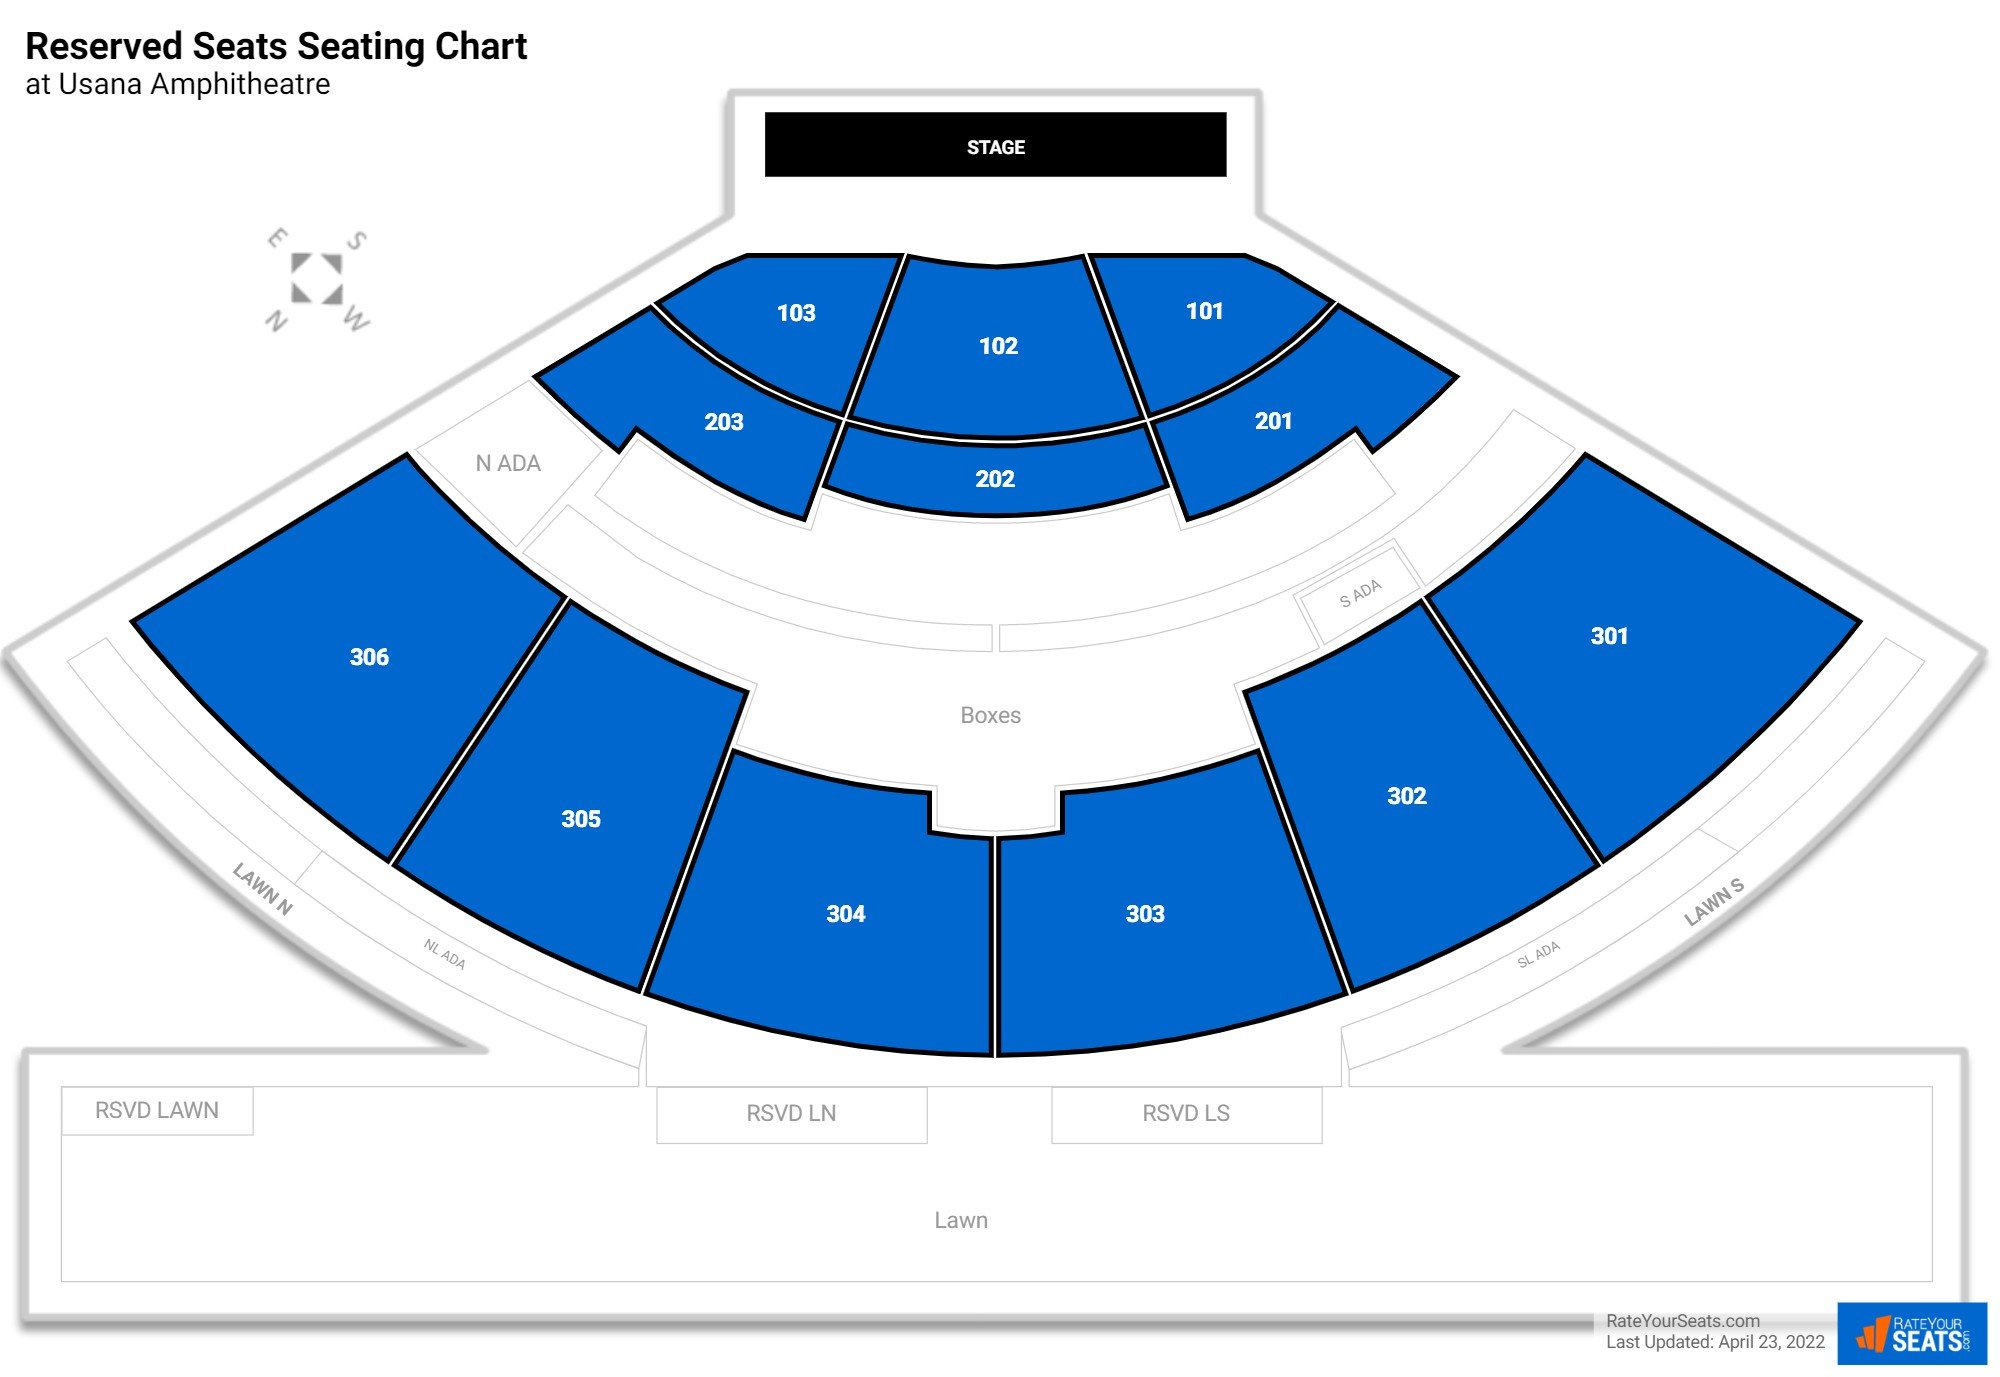 Concert Reserved Seats Seating Chart at Usana Amphitheatre